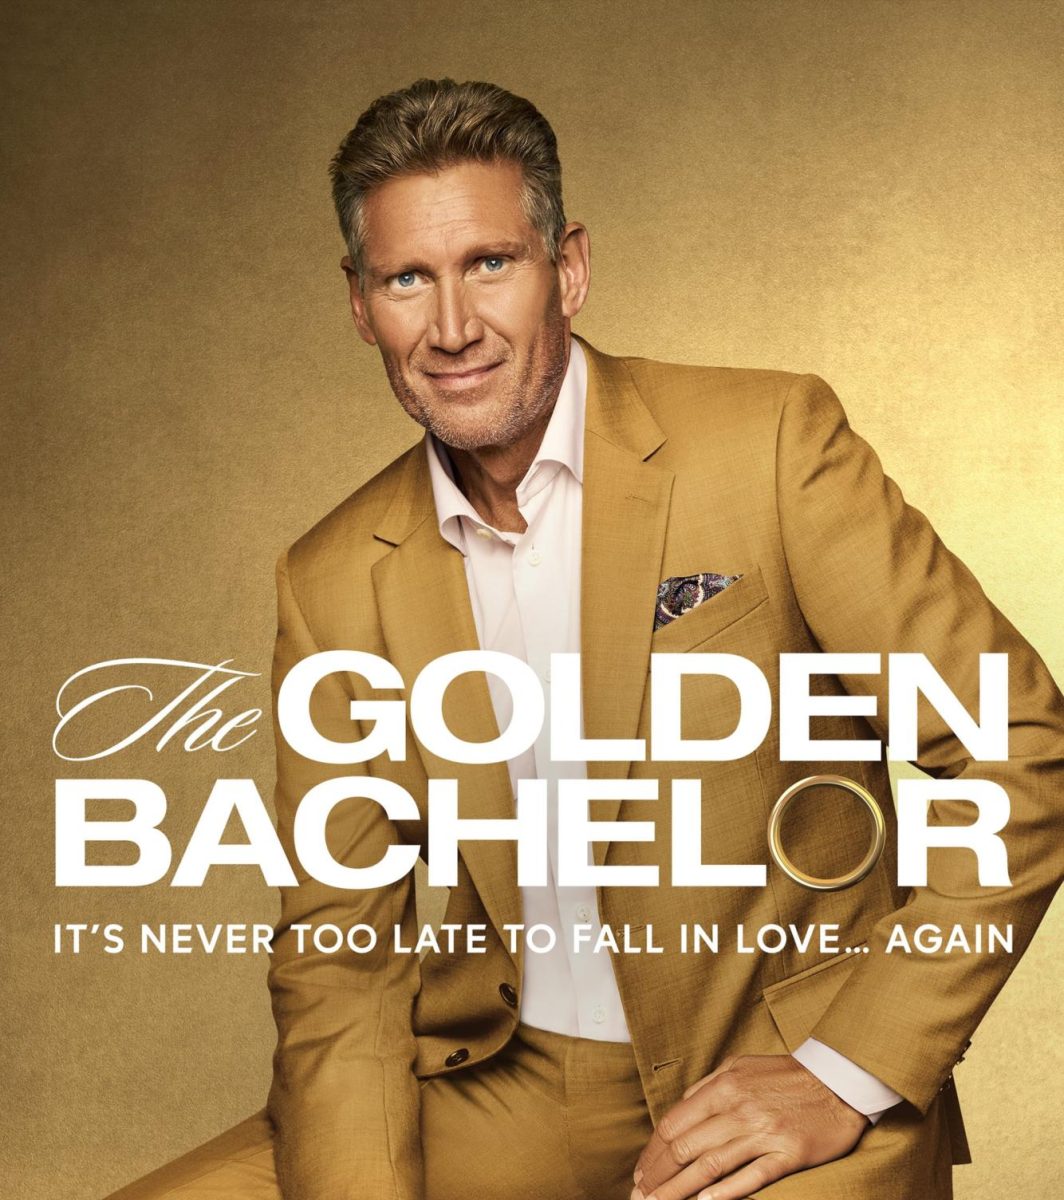 The+Golden+Bachelor+is+ready+for+some+exciting+new+love